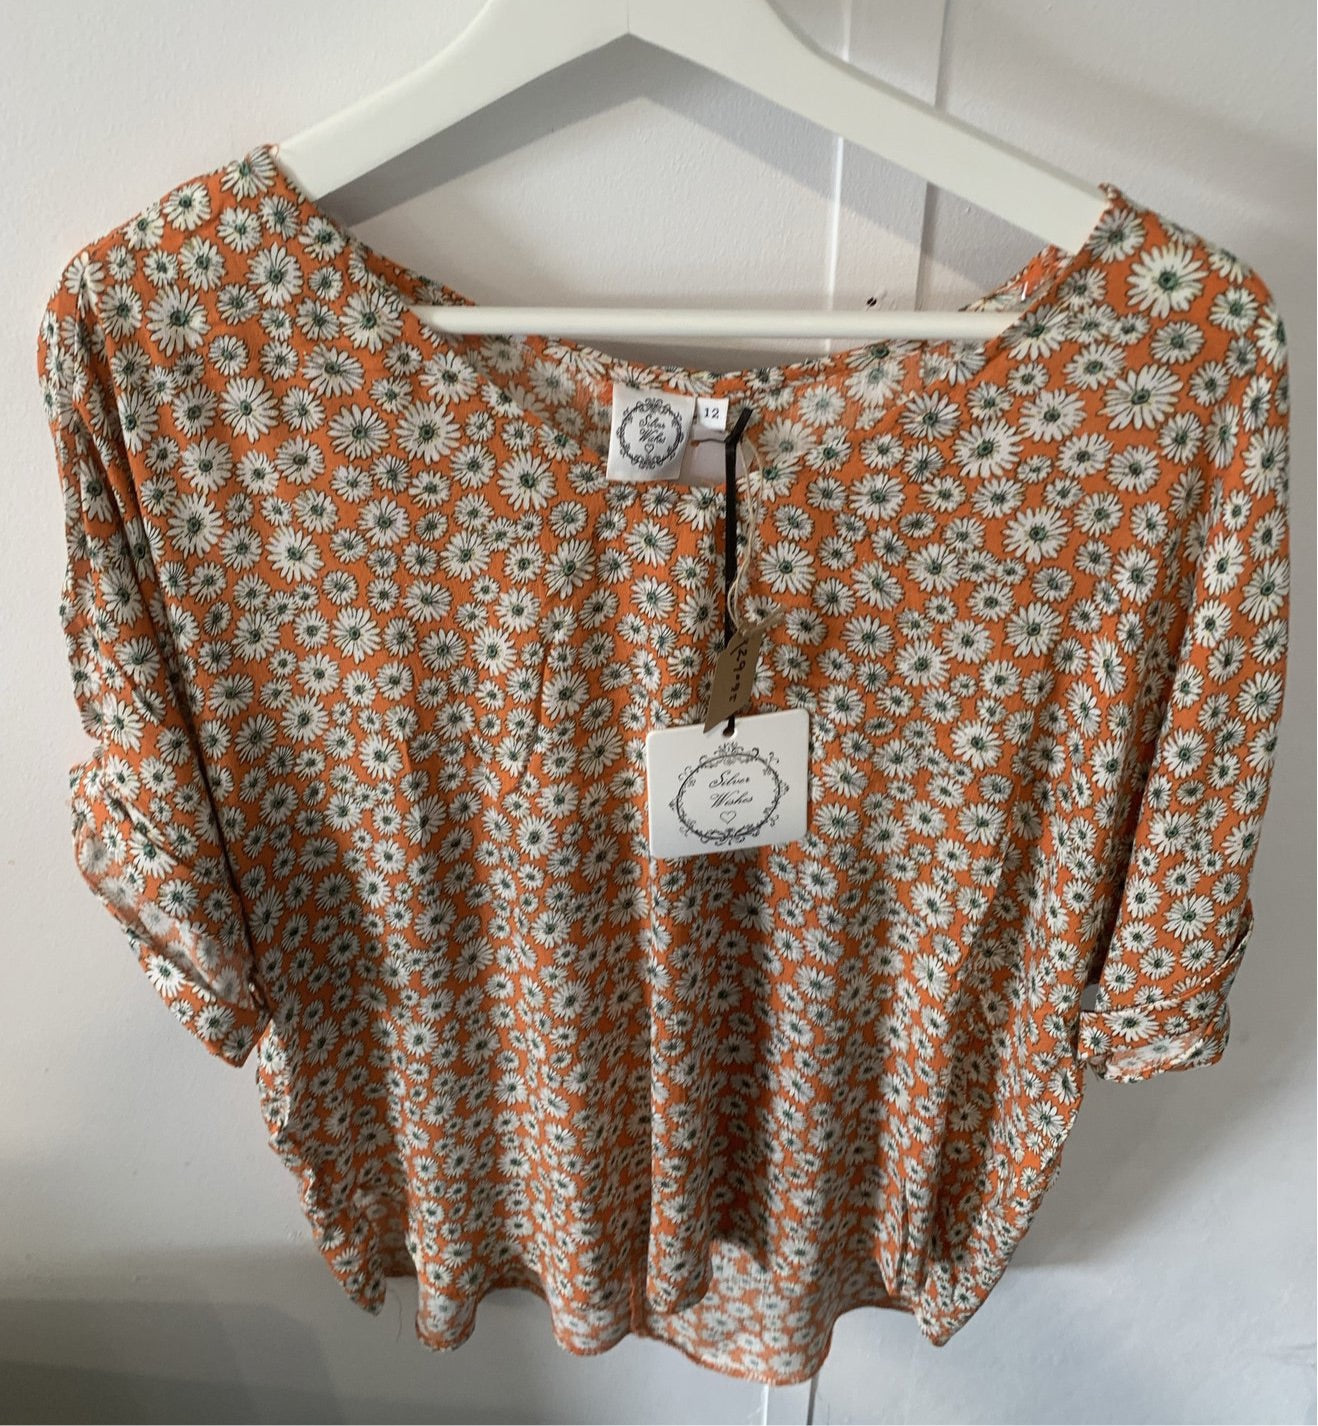 Orange Top with Daisy Print Short Cuffed Sleeves High Low Hemline - Silver Wishes